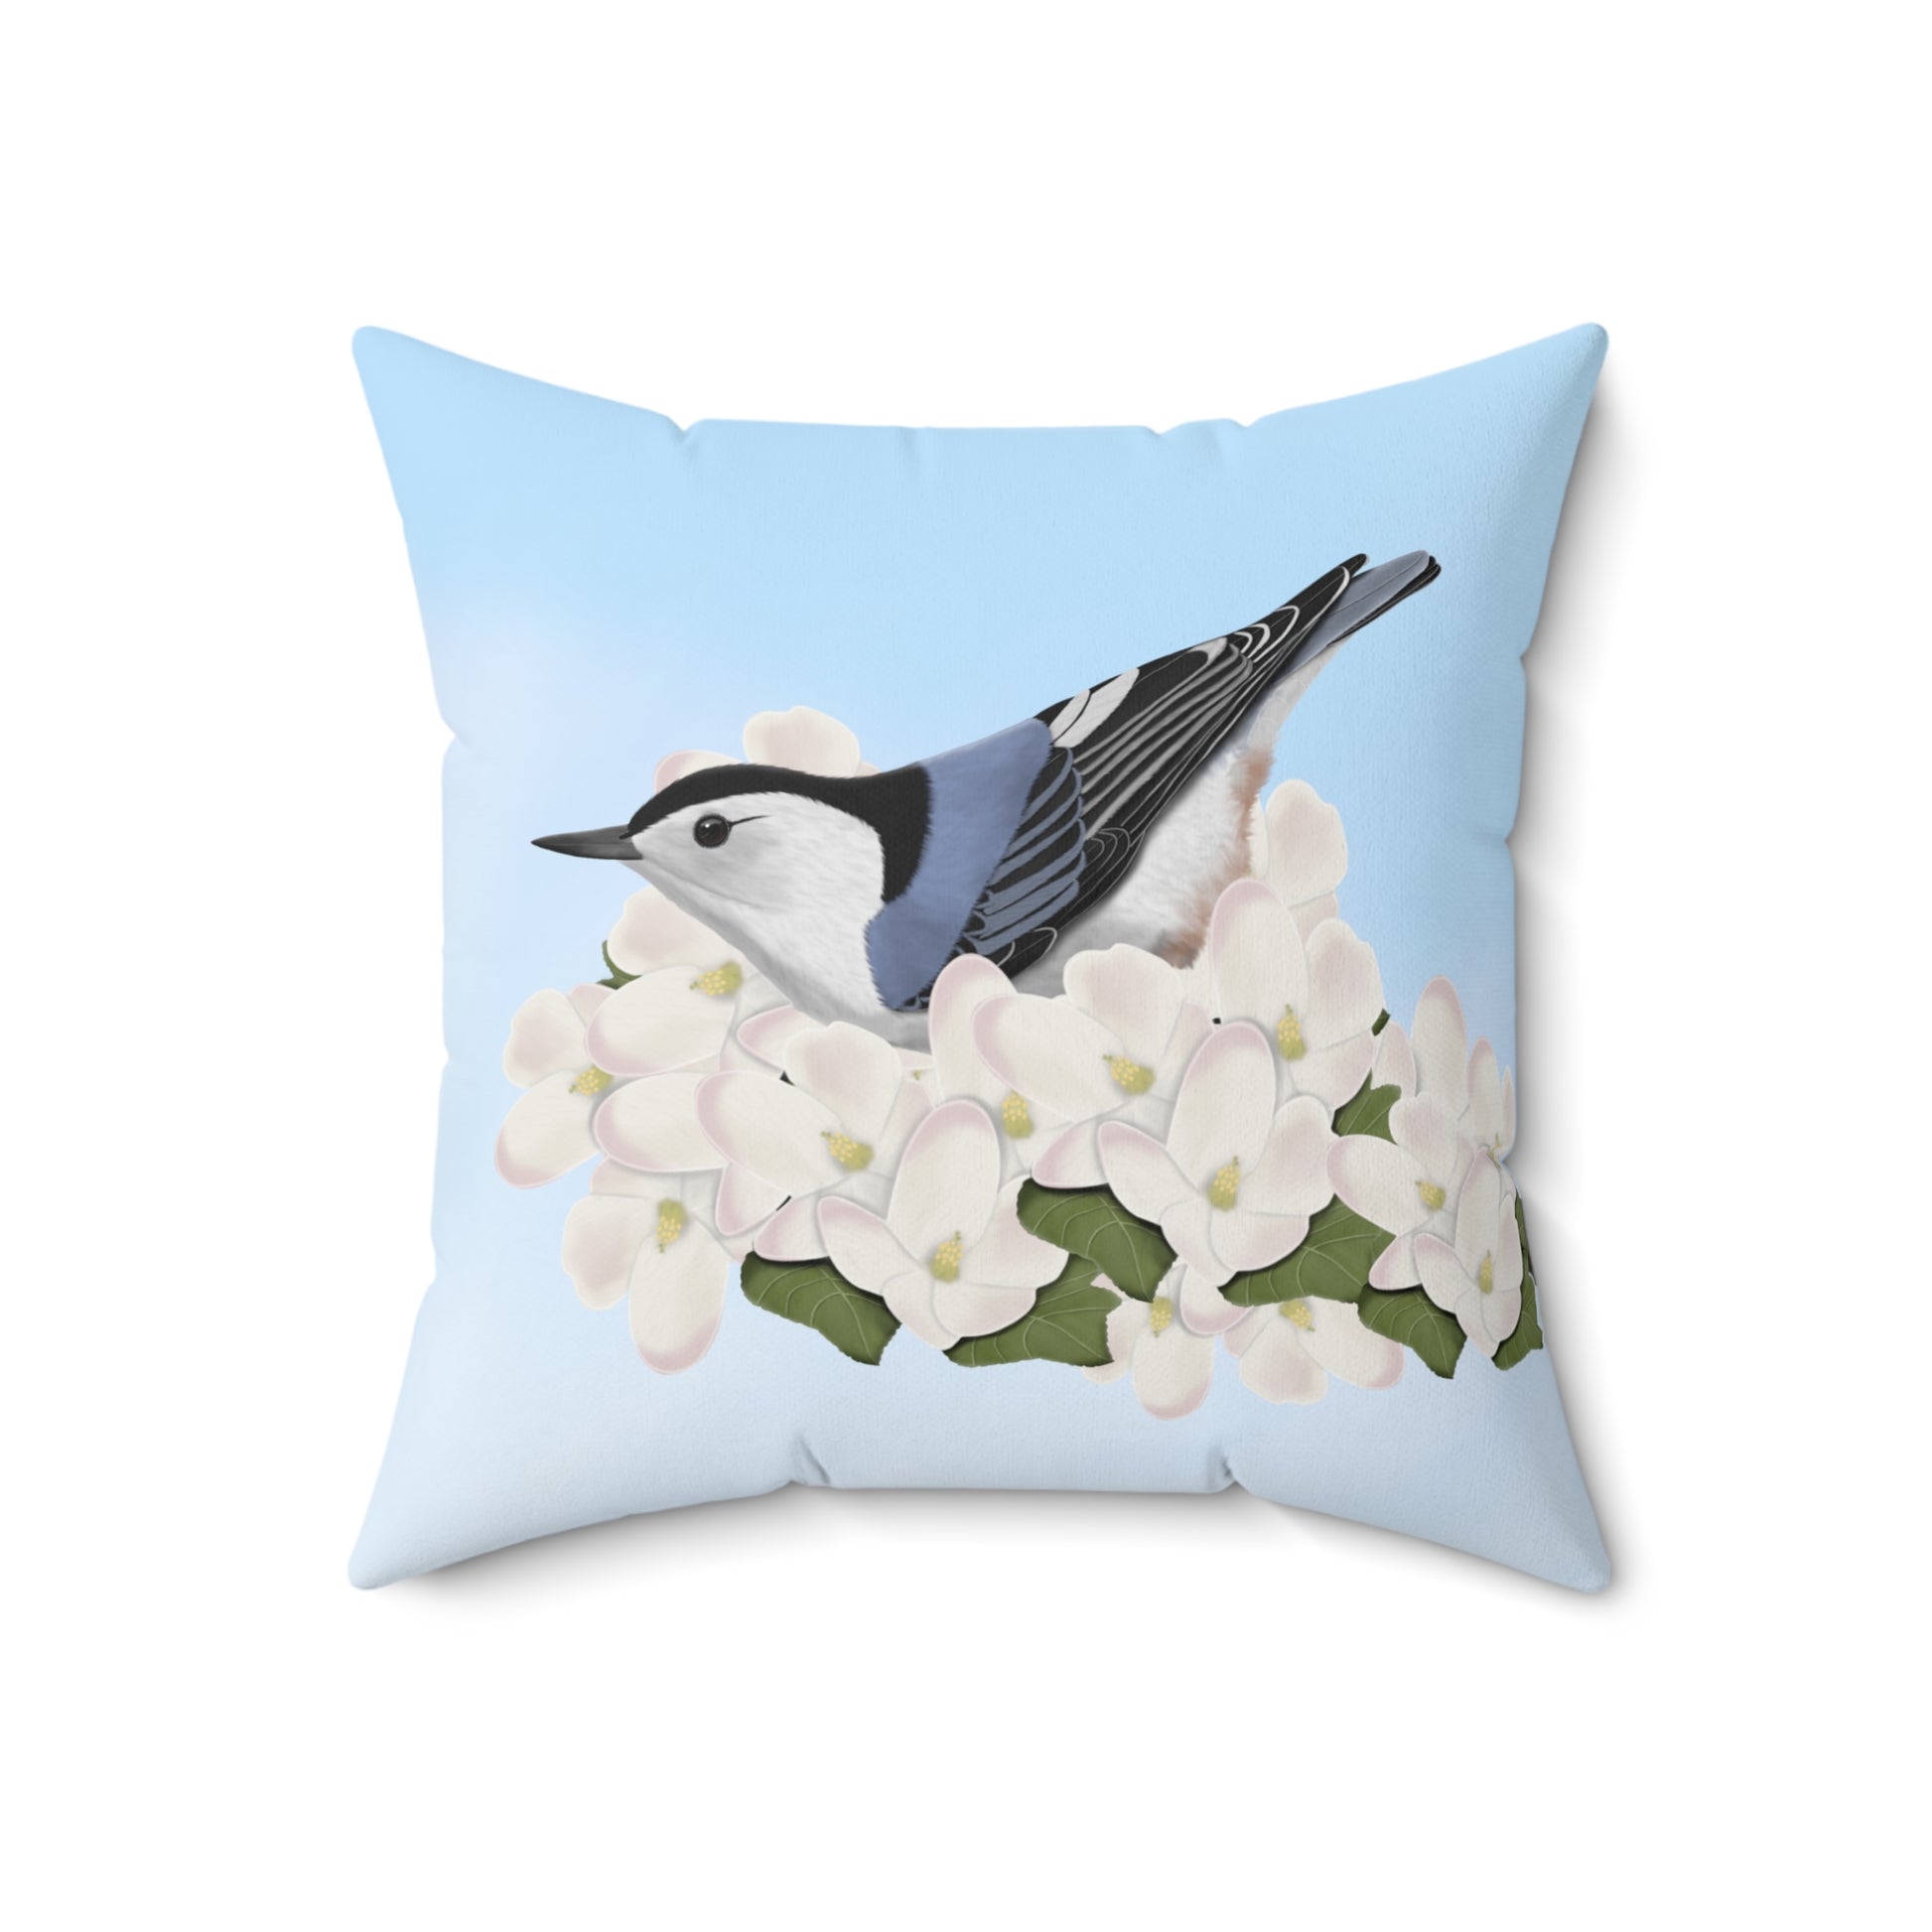 Nuthatch and Apple Blossoms Bird Throw Pillow 18"x18"